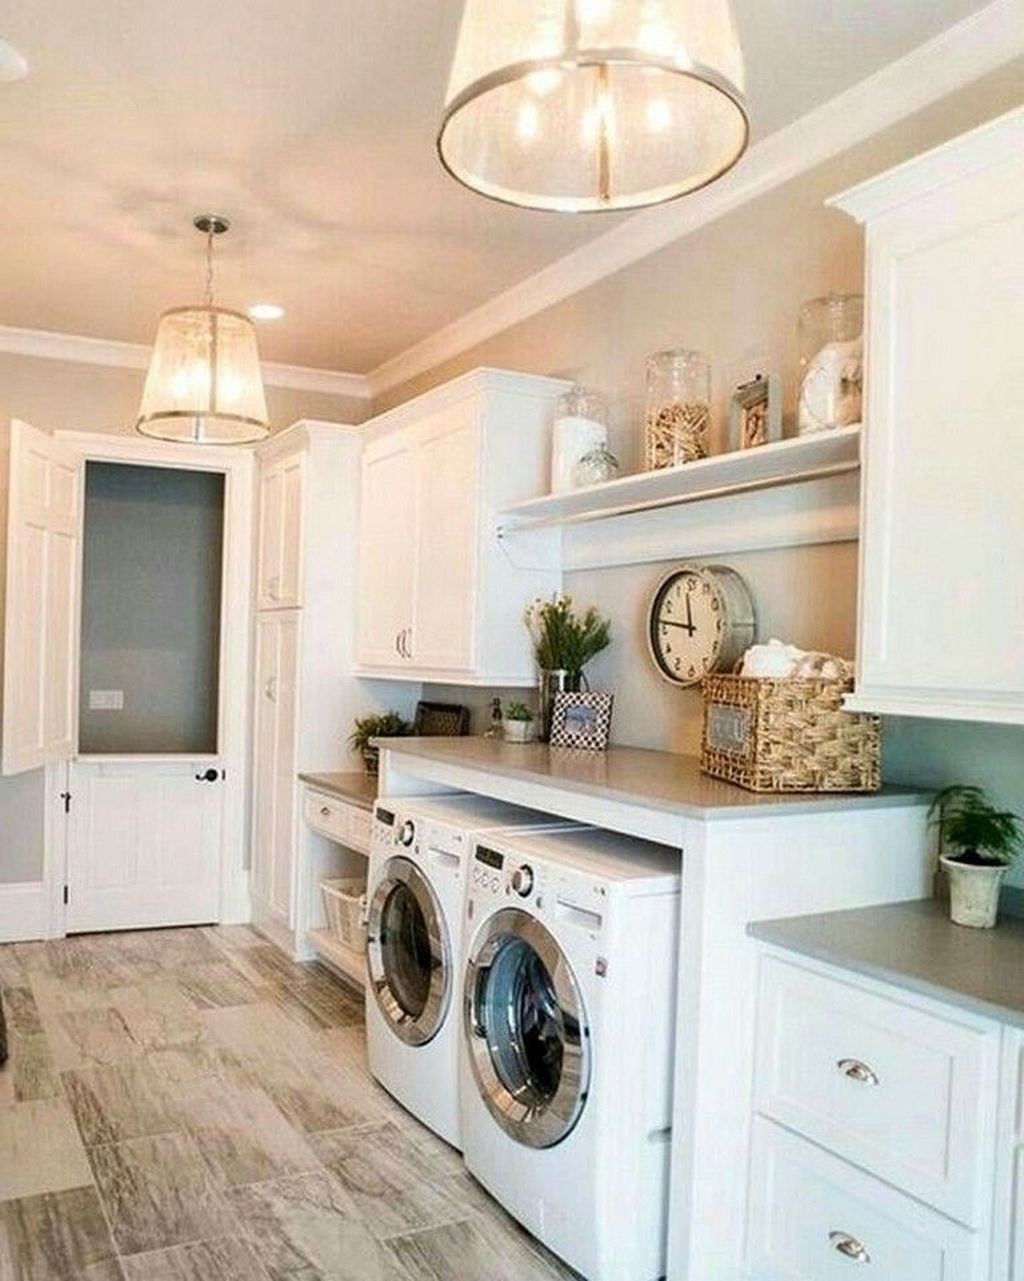 Inspiring Laundry Room Design With French Country Style 30